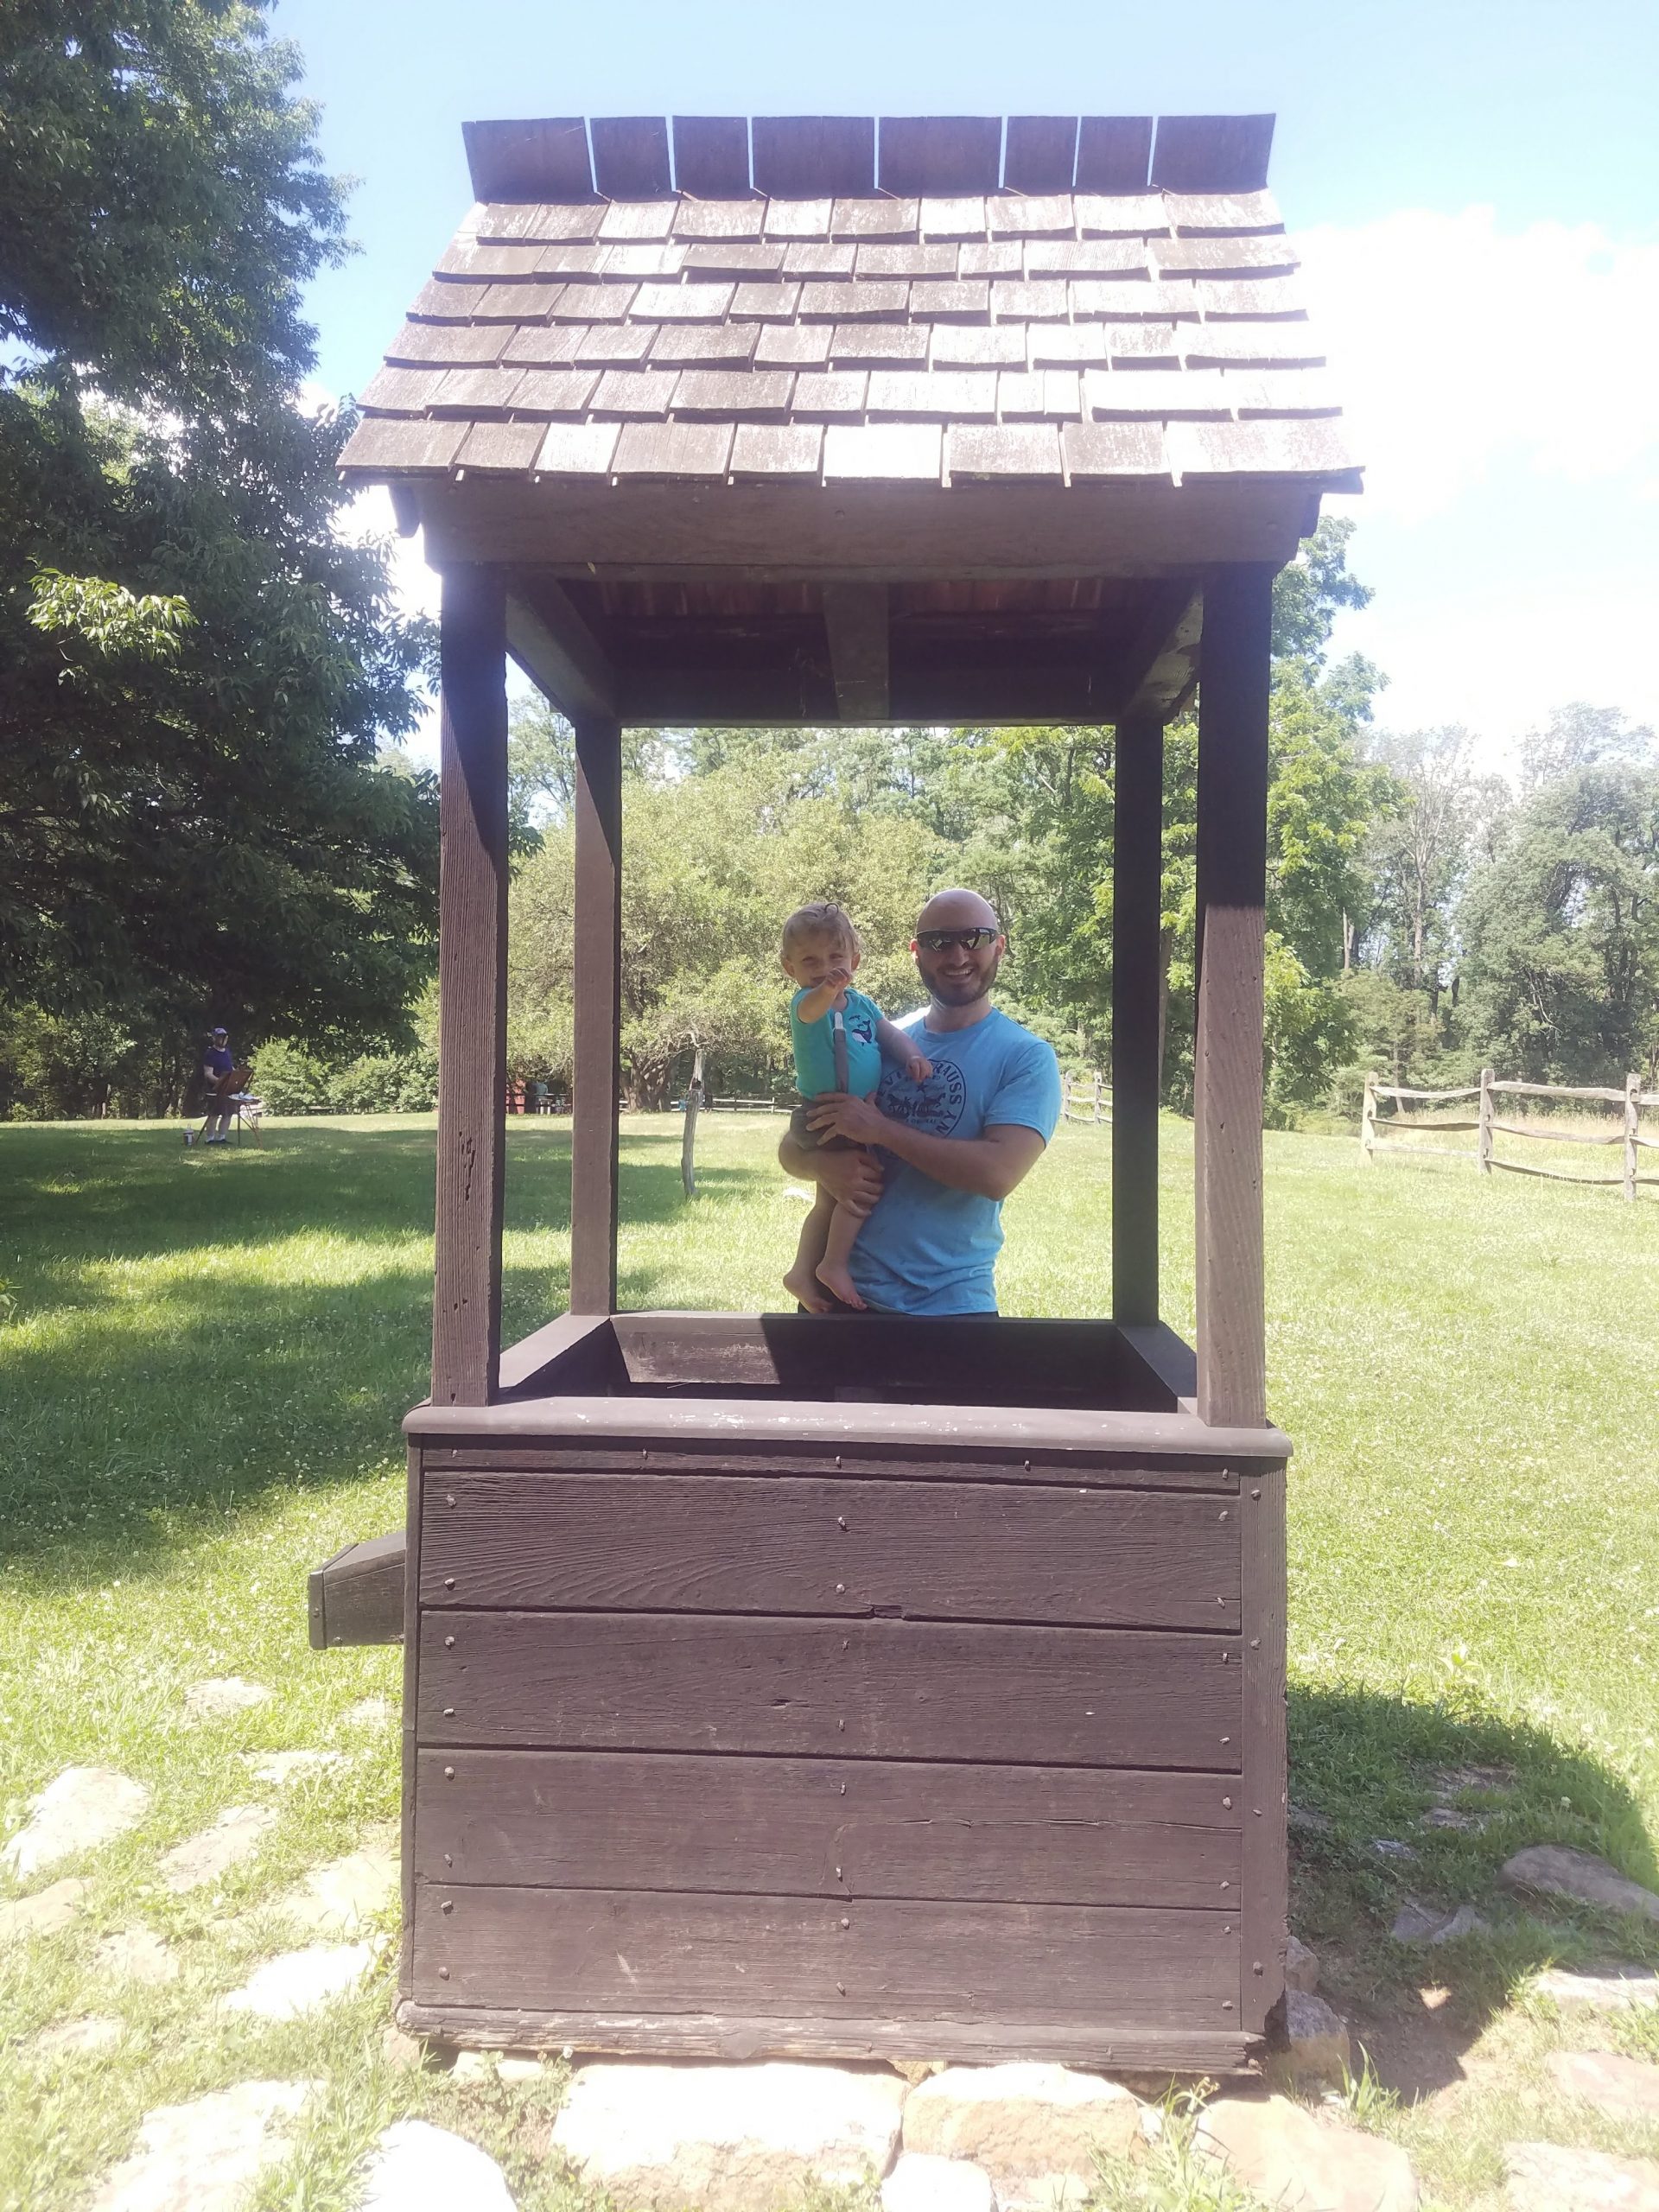 A man and child stand beside a wooden well 